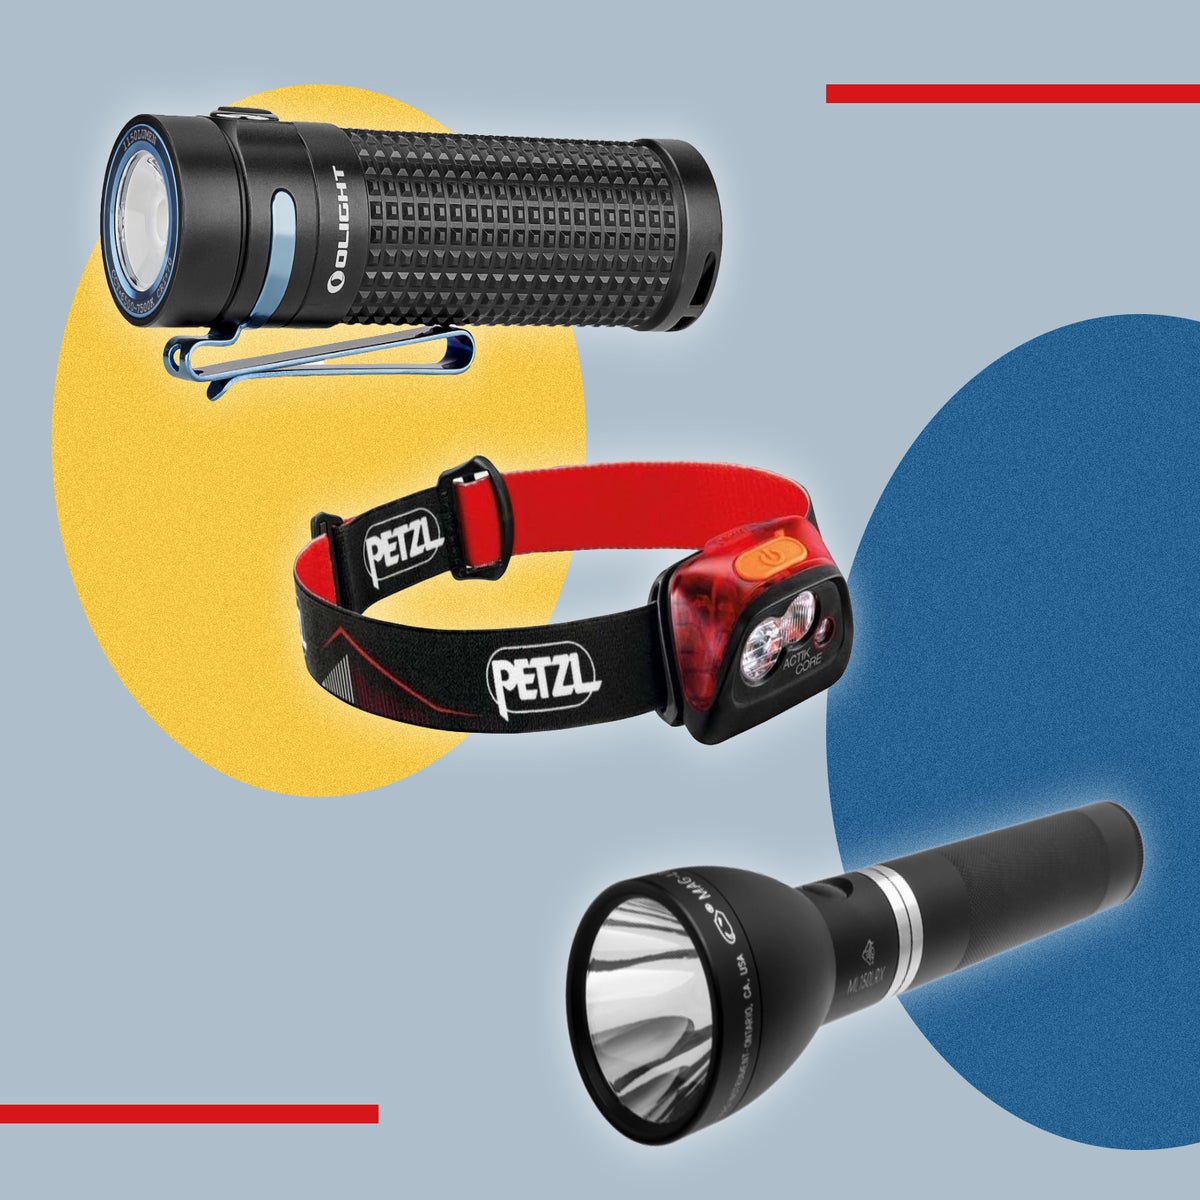 Best torch UK: From head torches to rechargeable to LED devices